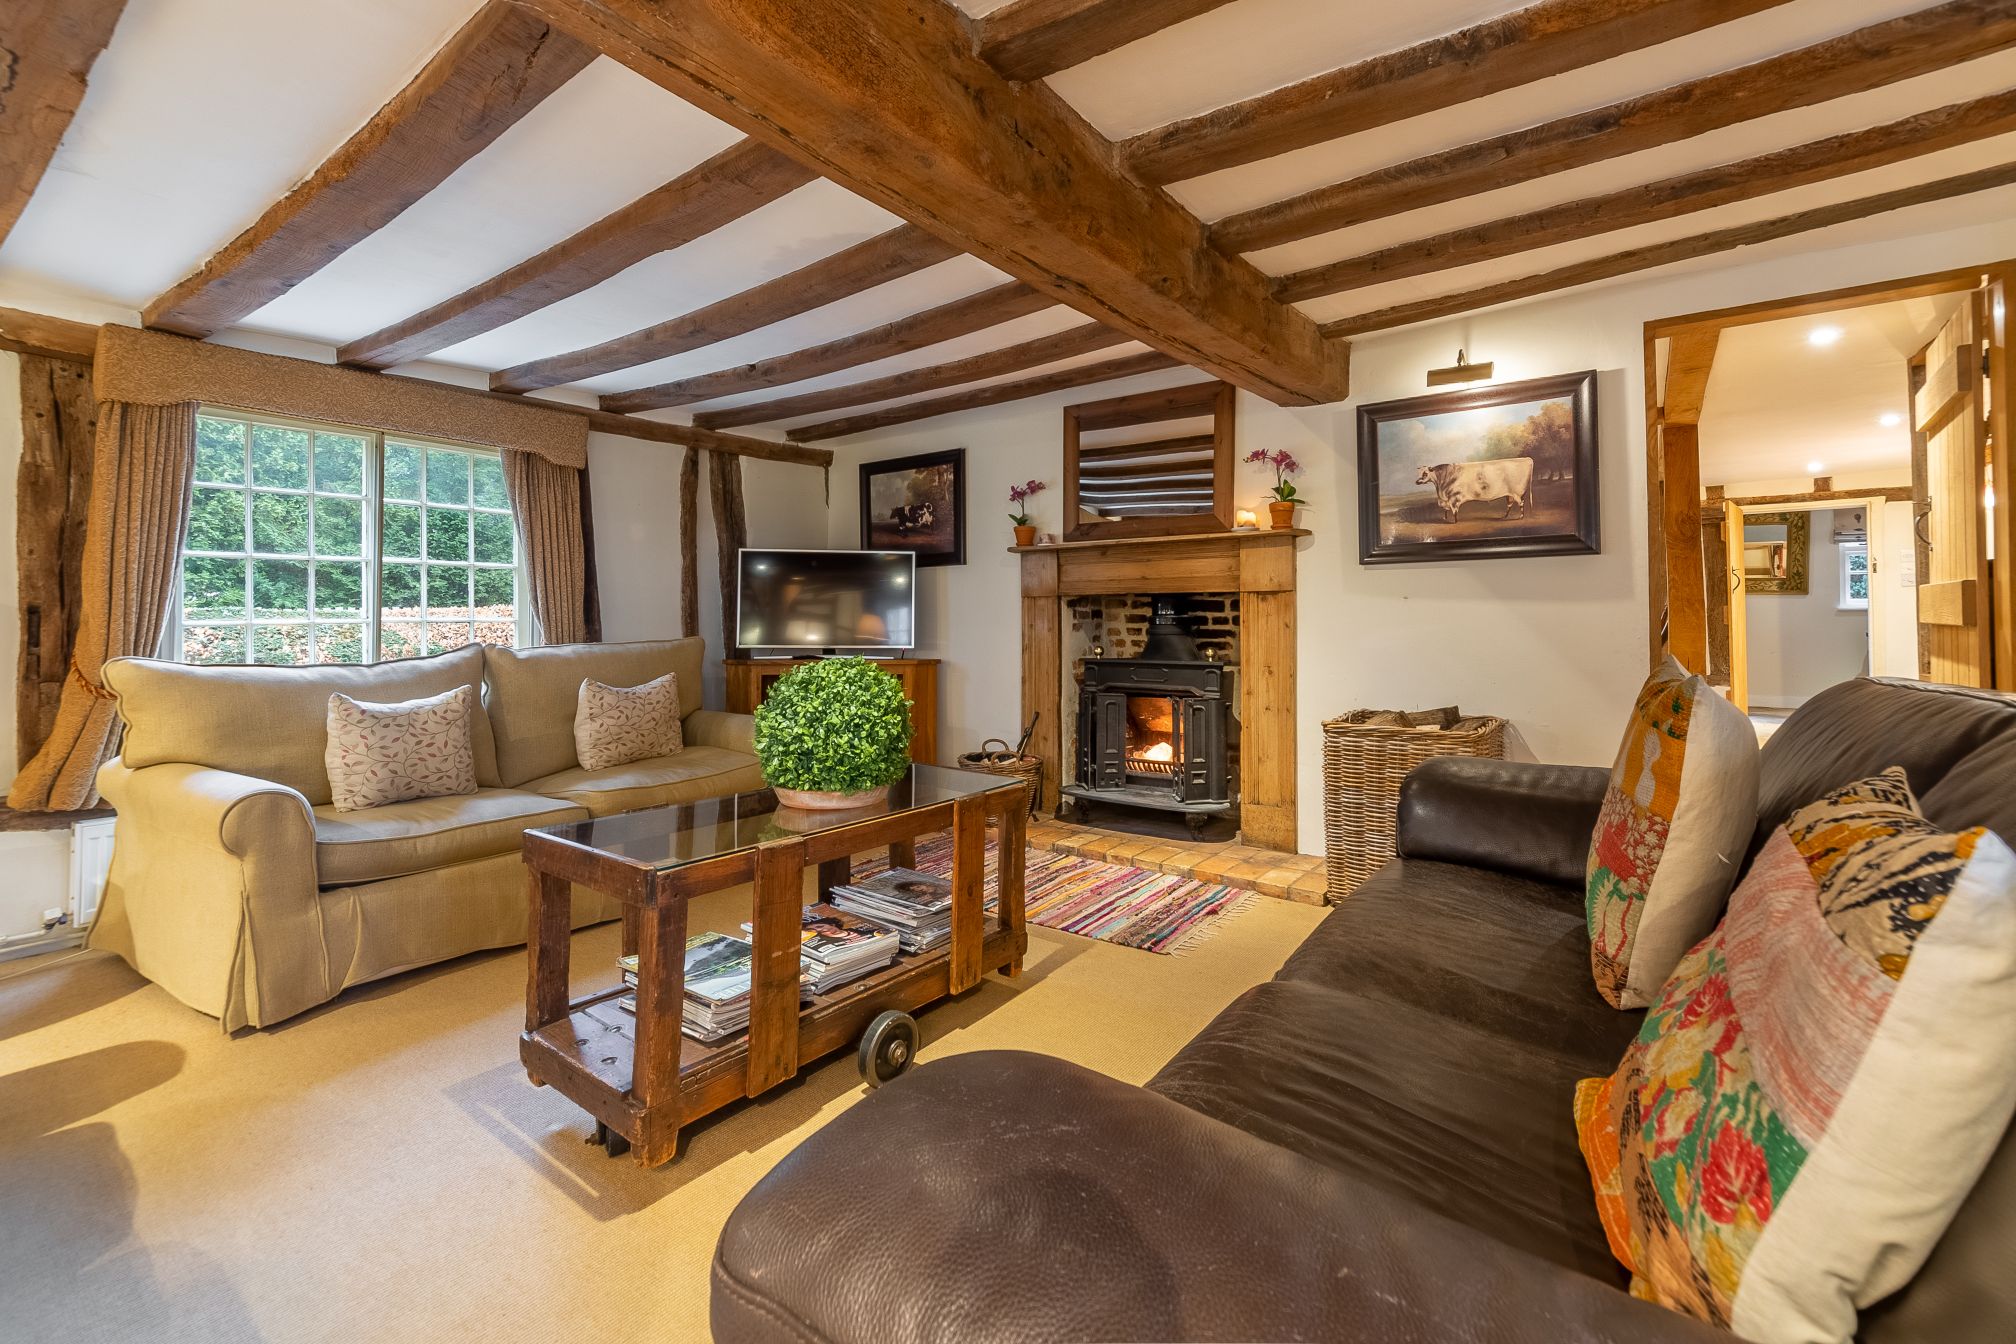 The Gildhall | 3 Bedroom Cottage in Higham from £495